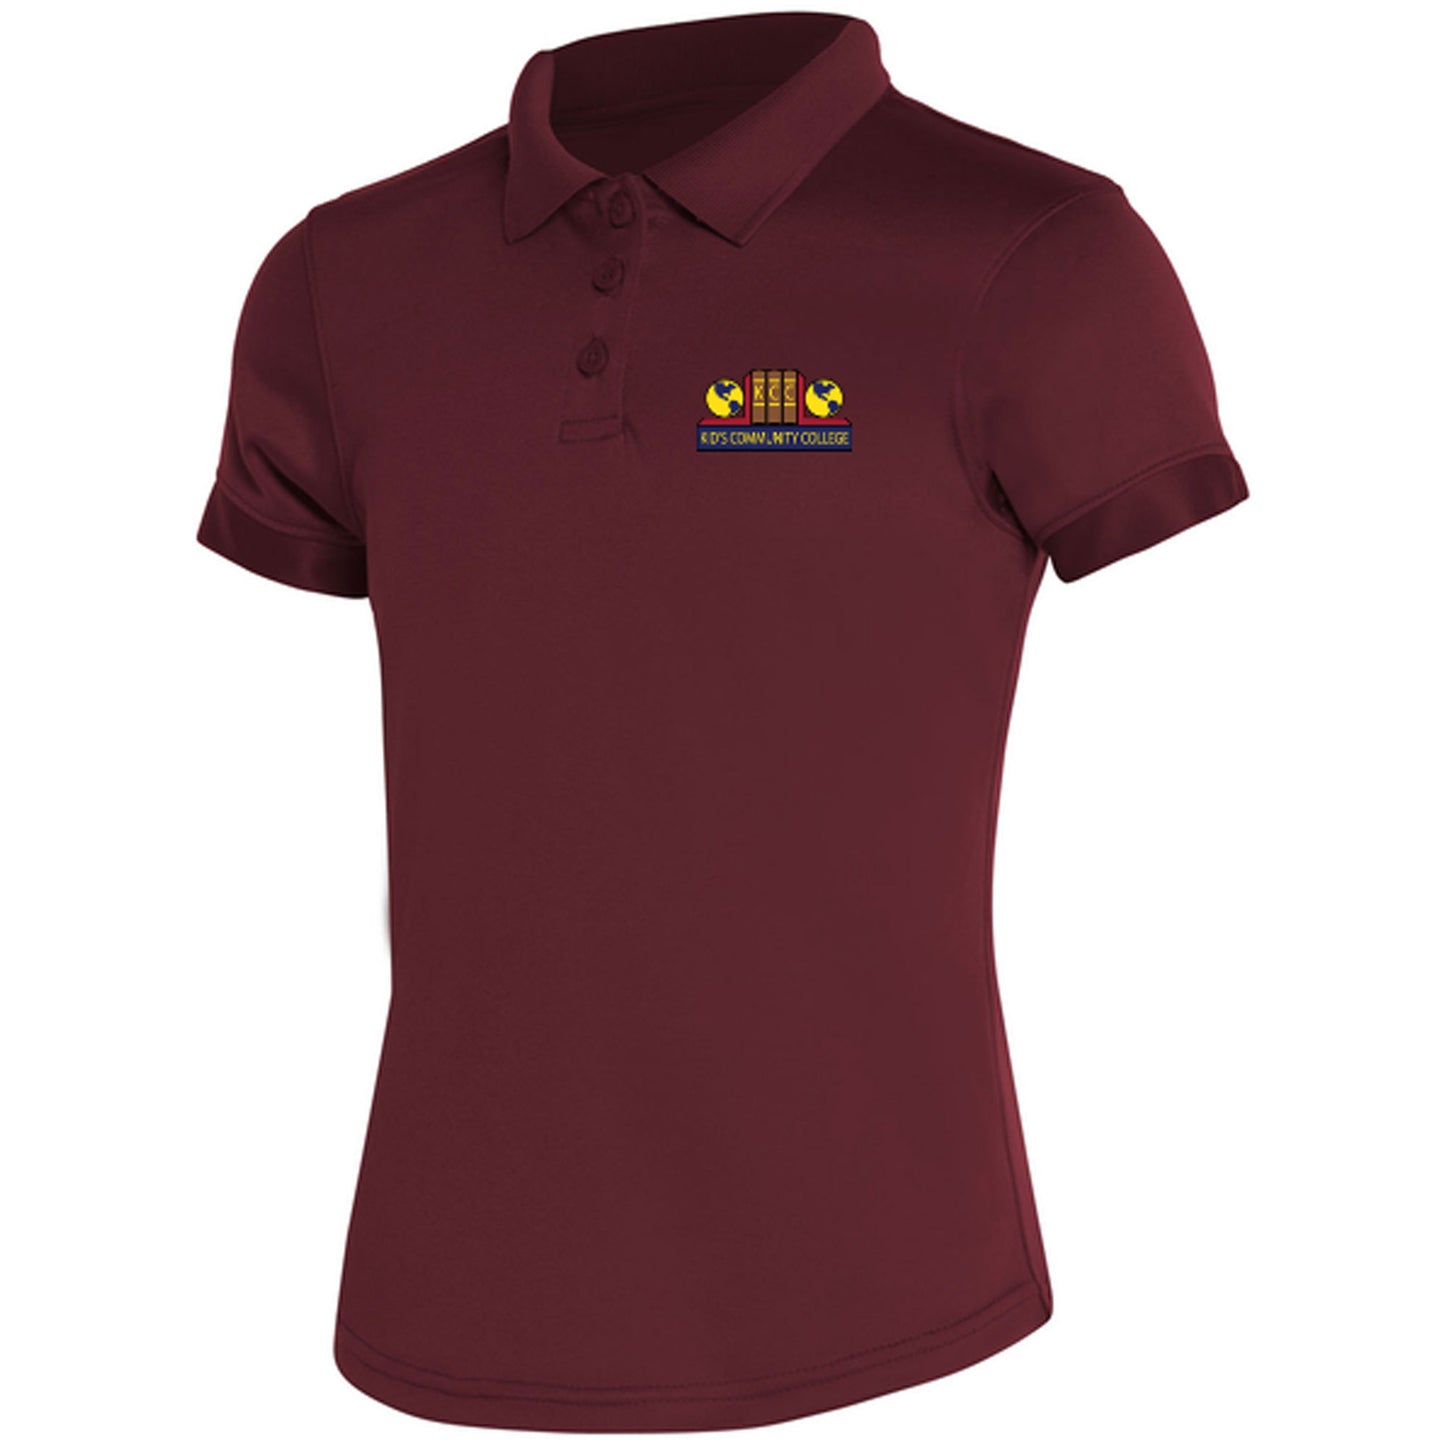 KCCSL Girls Elementary Moisture Wicking Polo - SPECIAL ORDER!